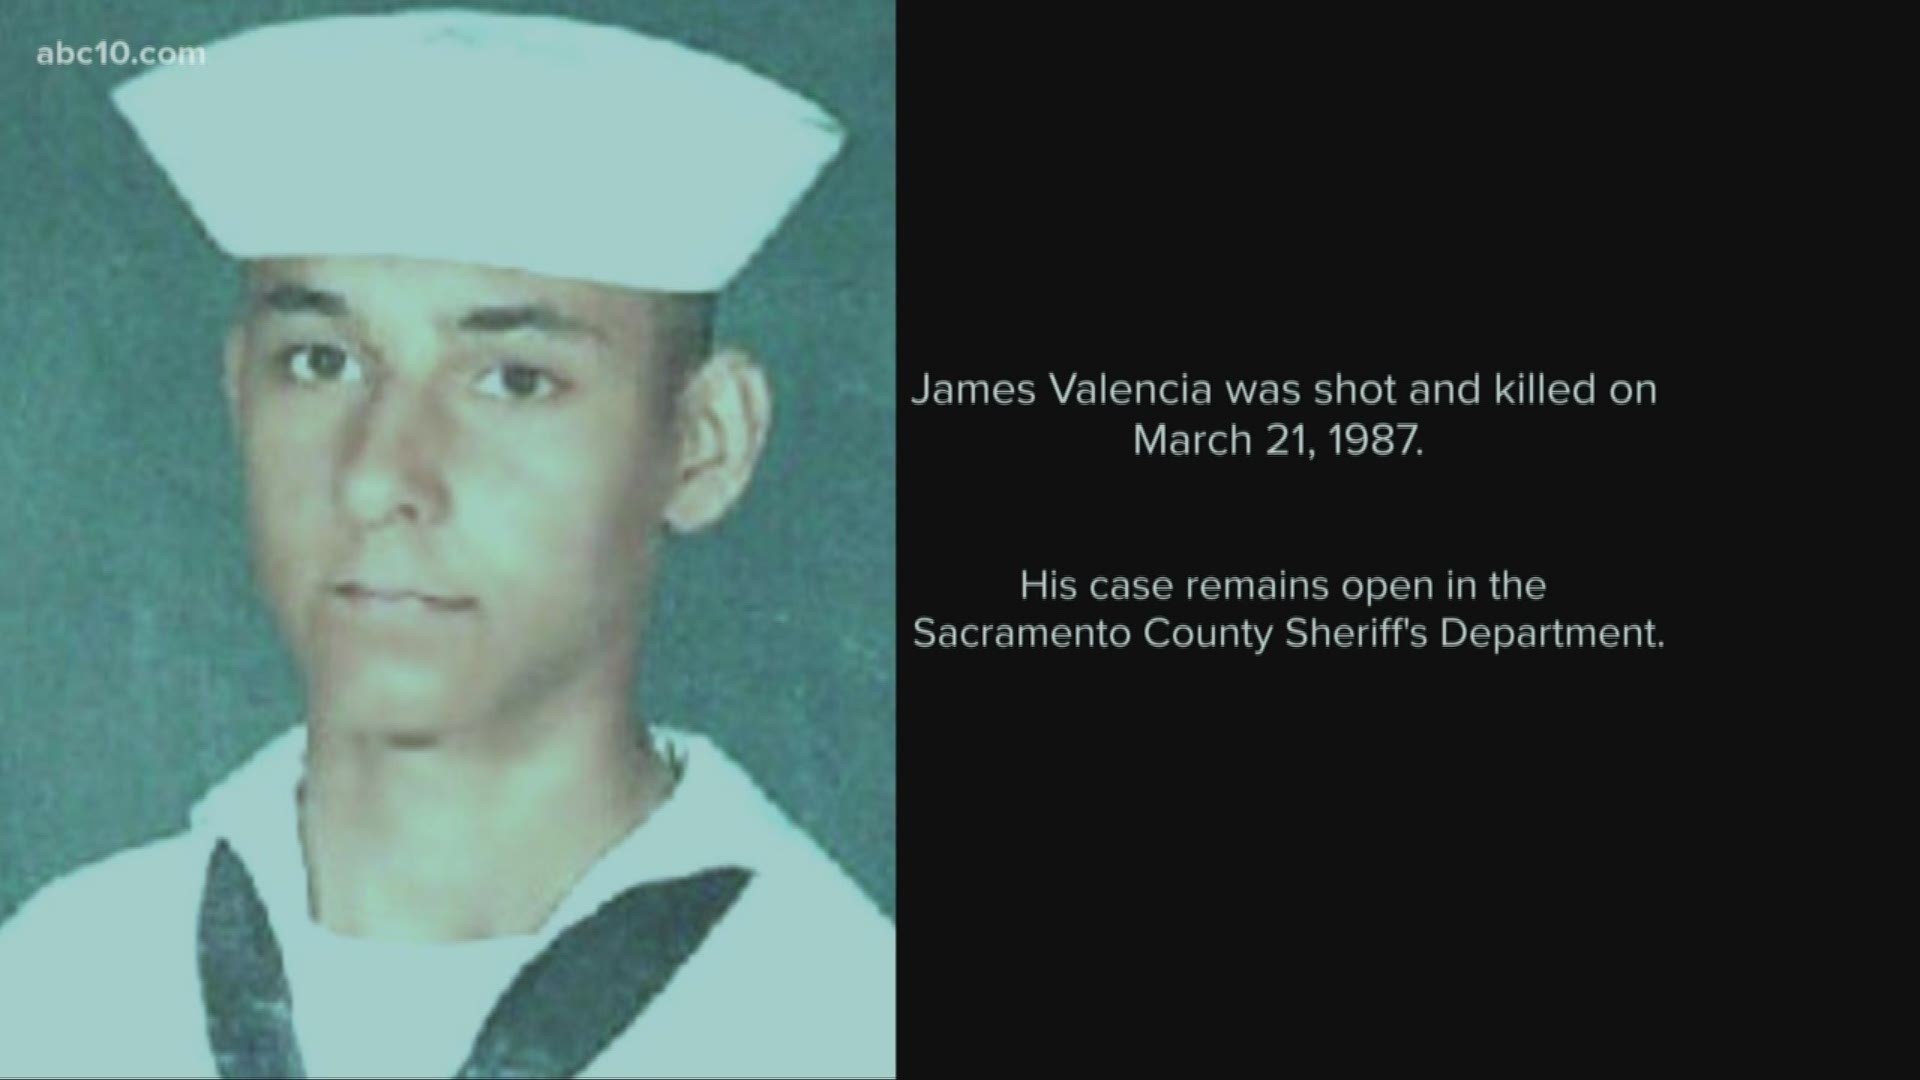 James Valencia was shot and killed on March 21, 1987 just off Excelsior Road. His case remains open in the Sacramento County Sheriff's Department. His sister says, now, she doesn't even want justice. She just wants answers.